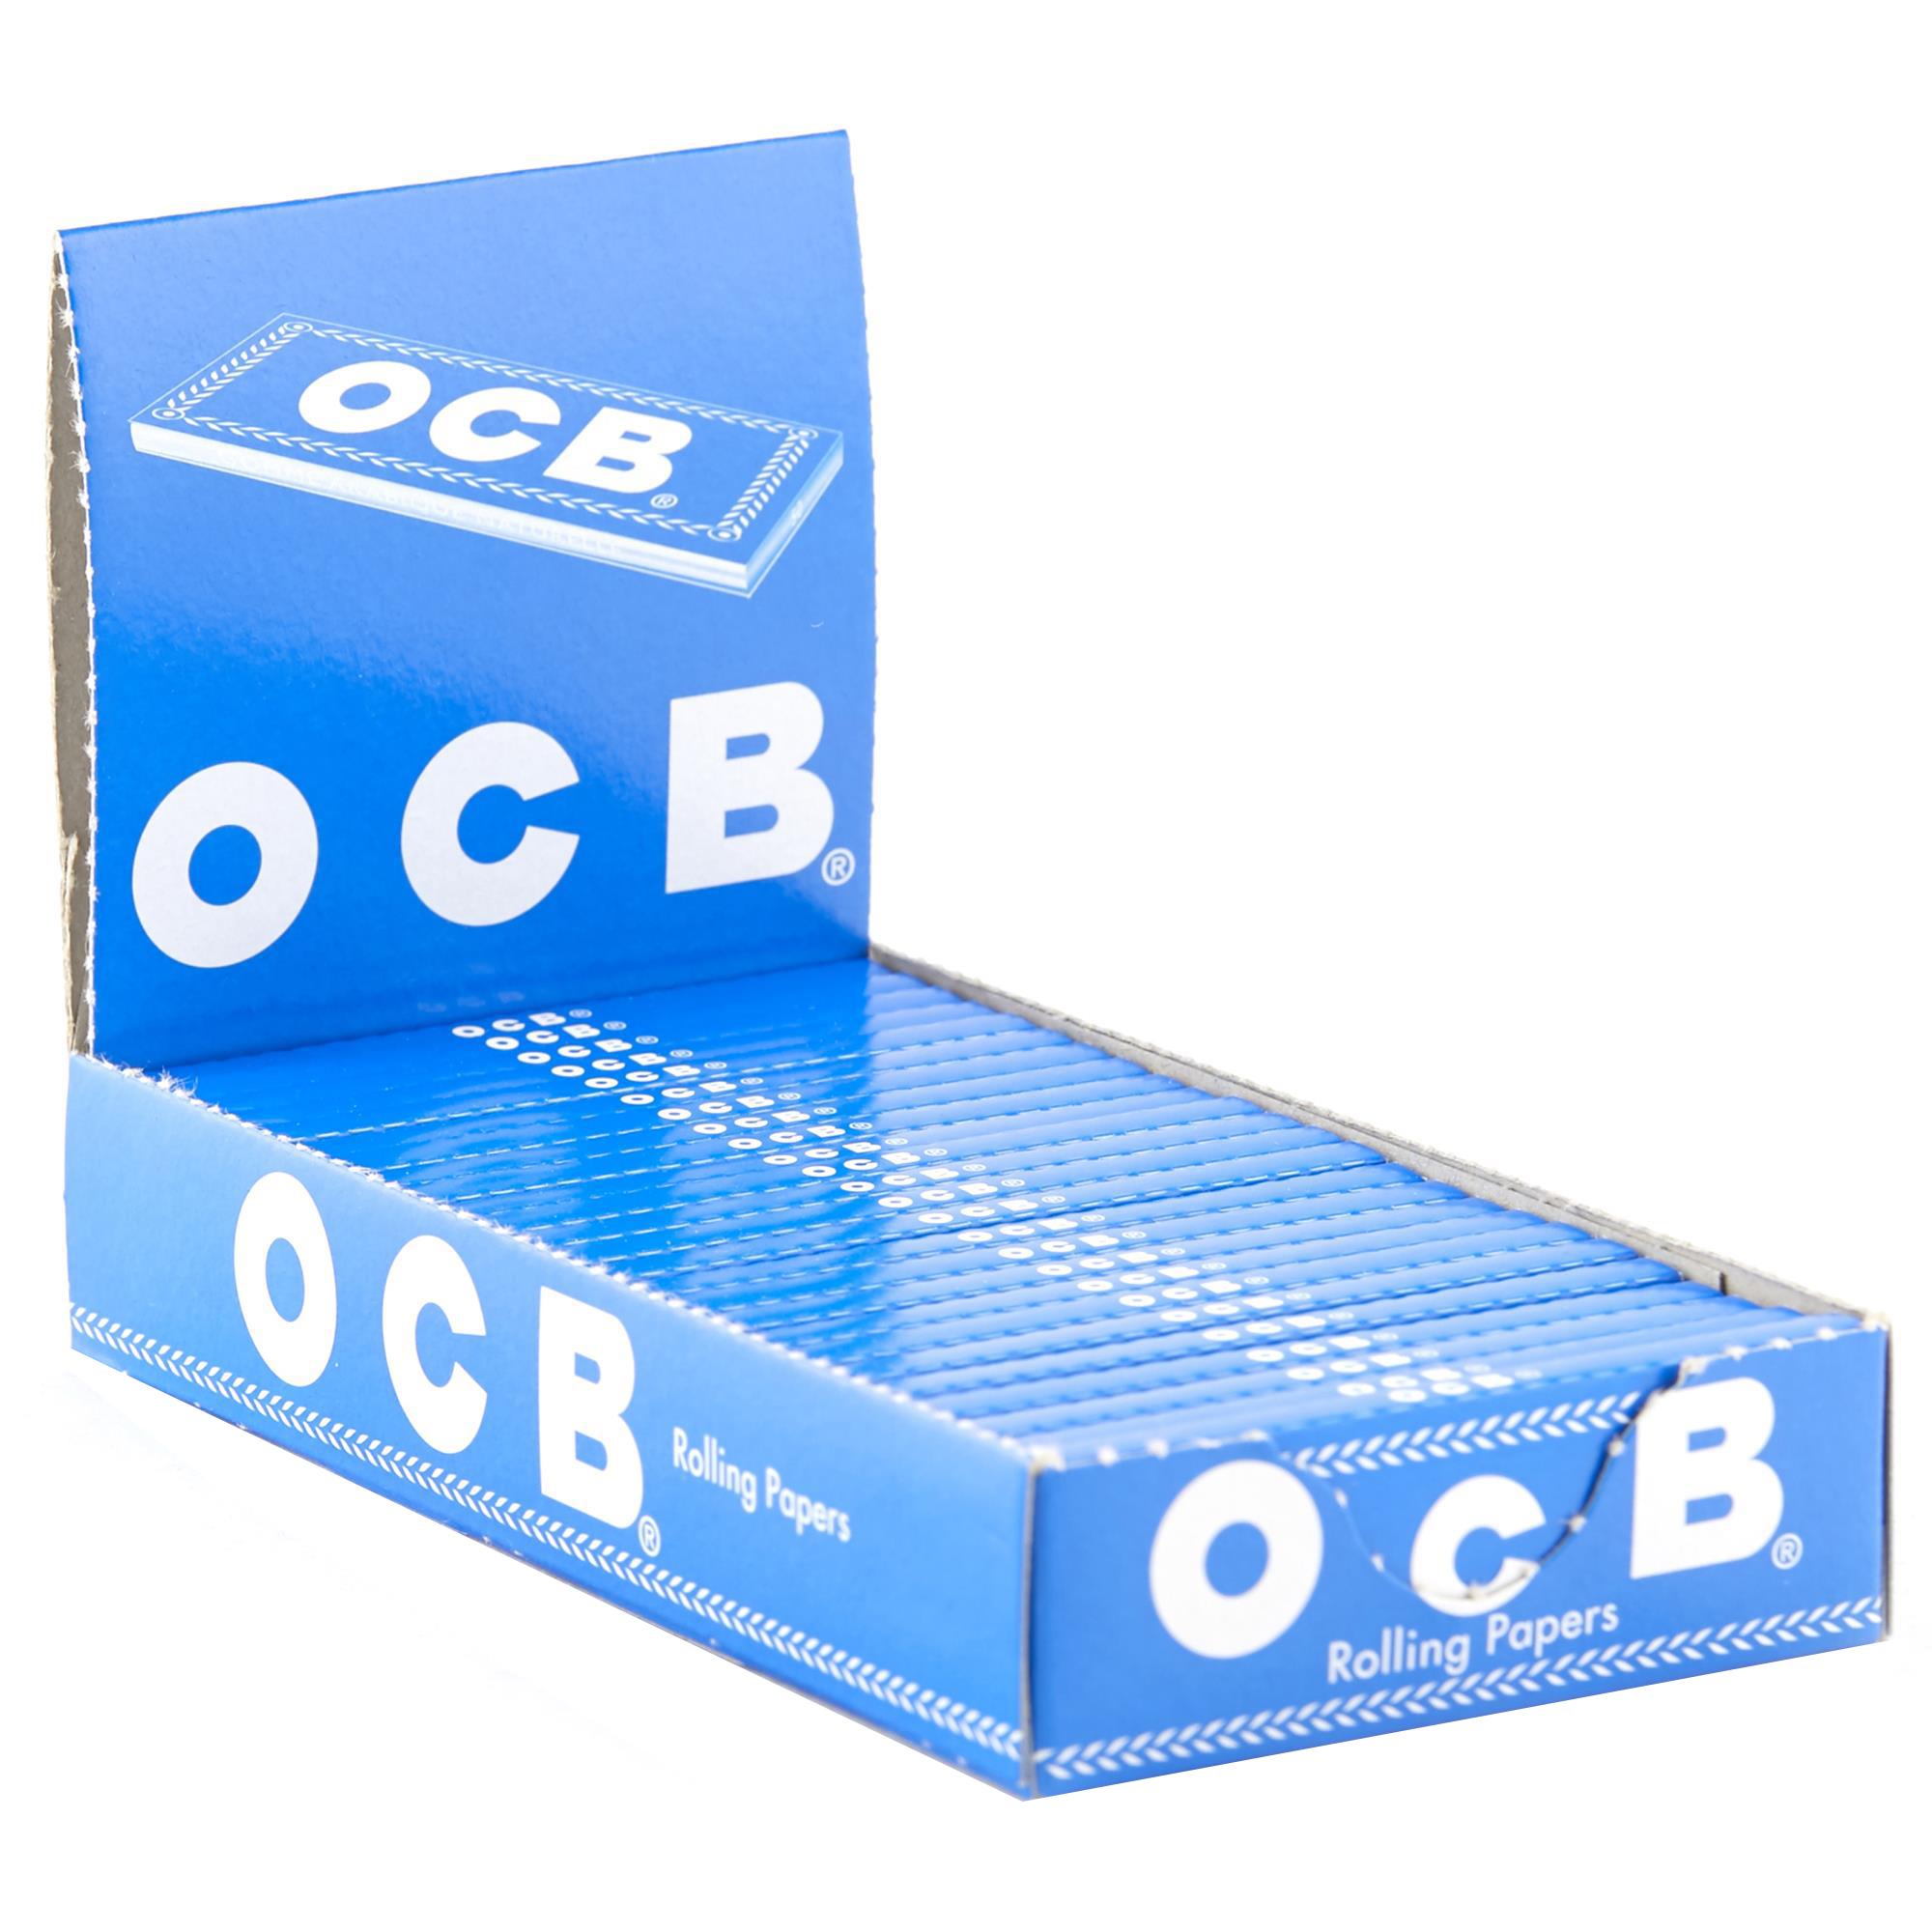 pcs OCB Blue Rolling Papers standard size 50 Sheets/Booklet 1/10/25/50 